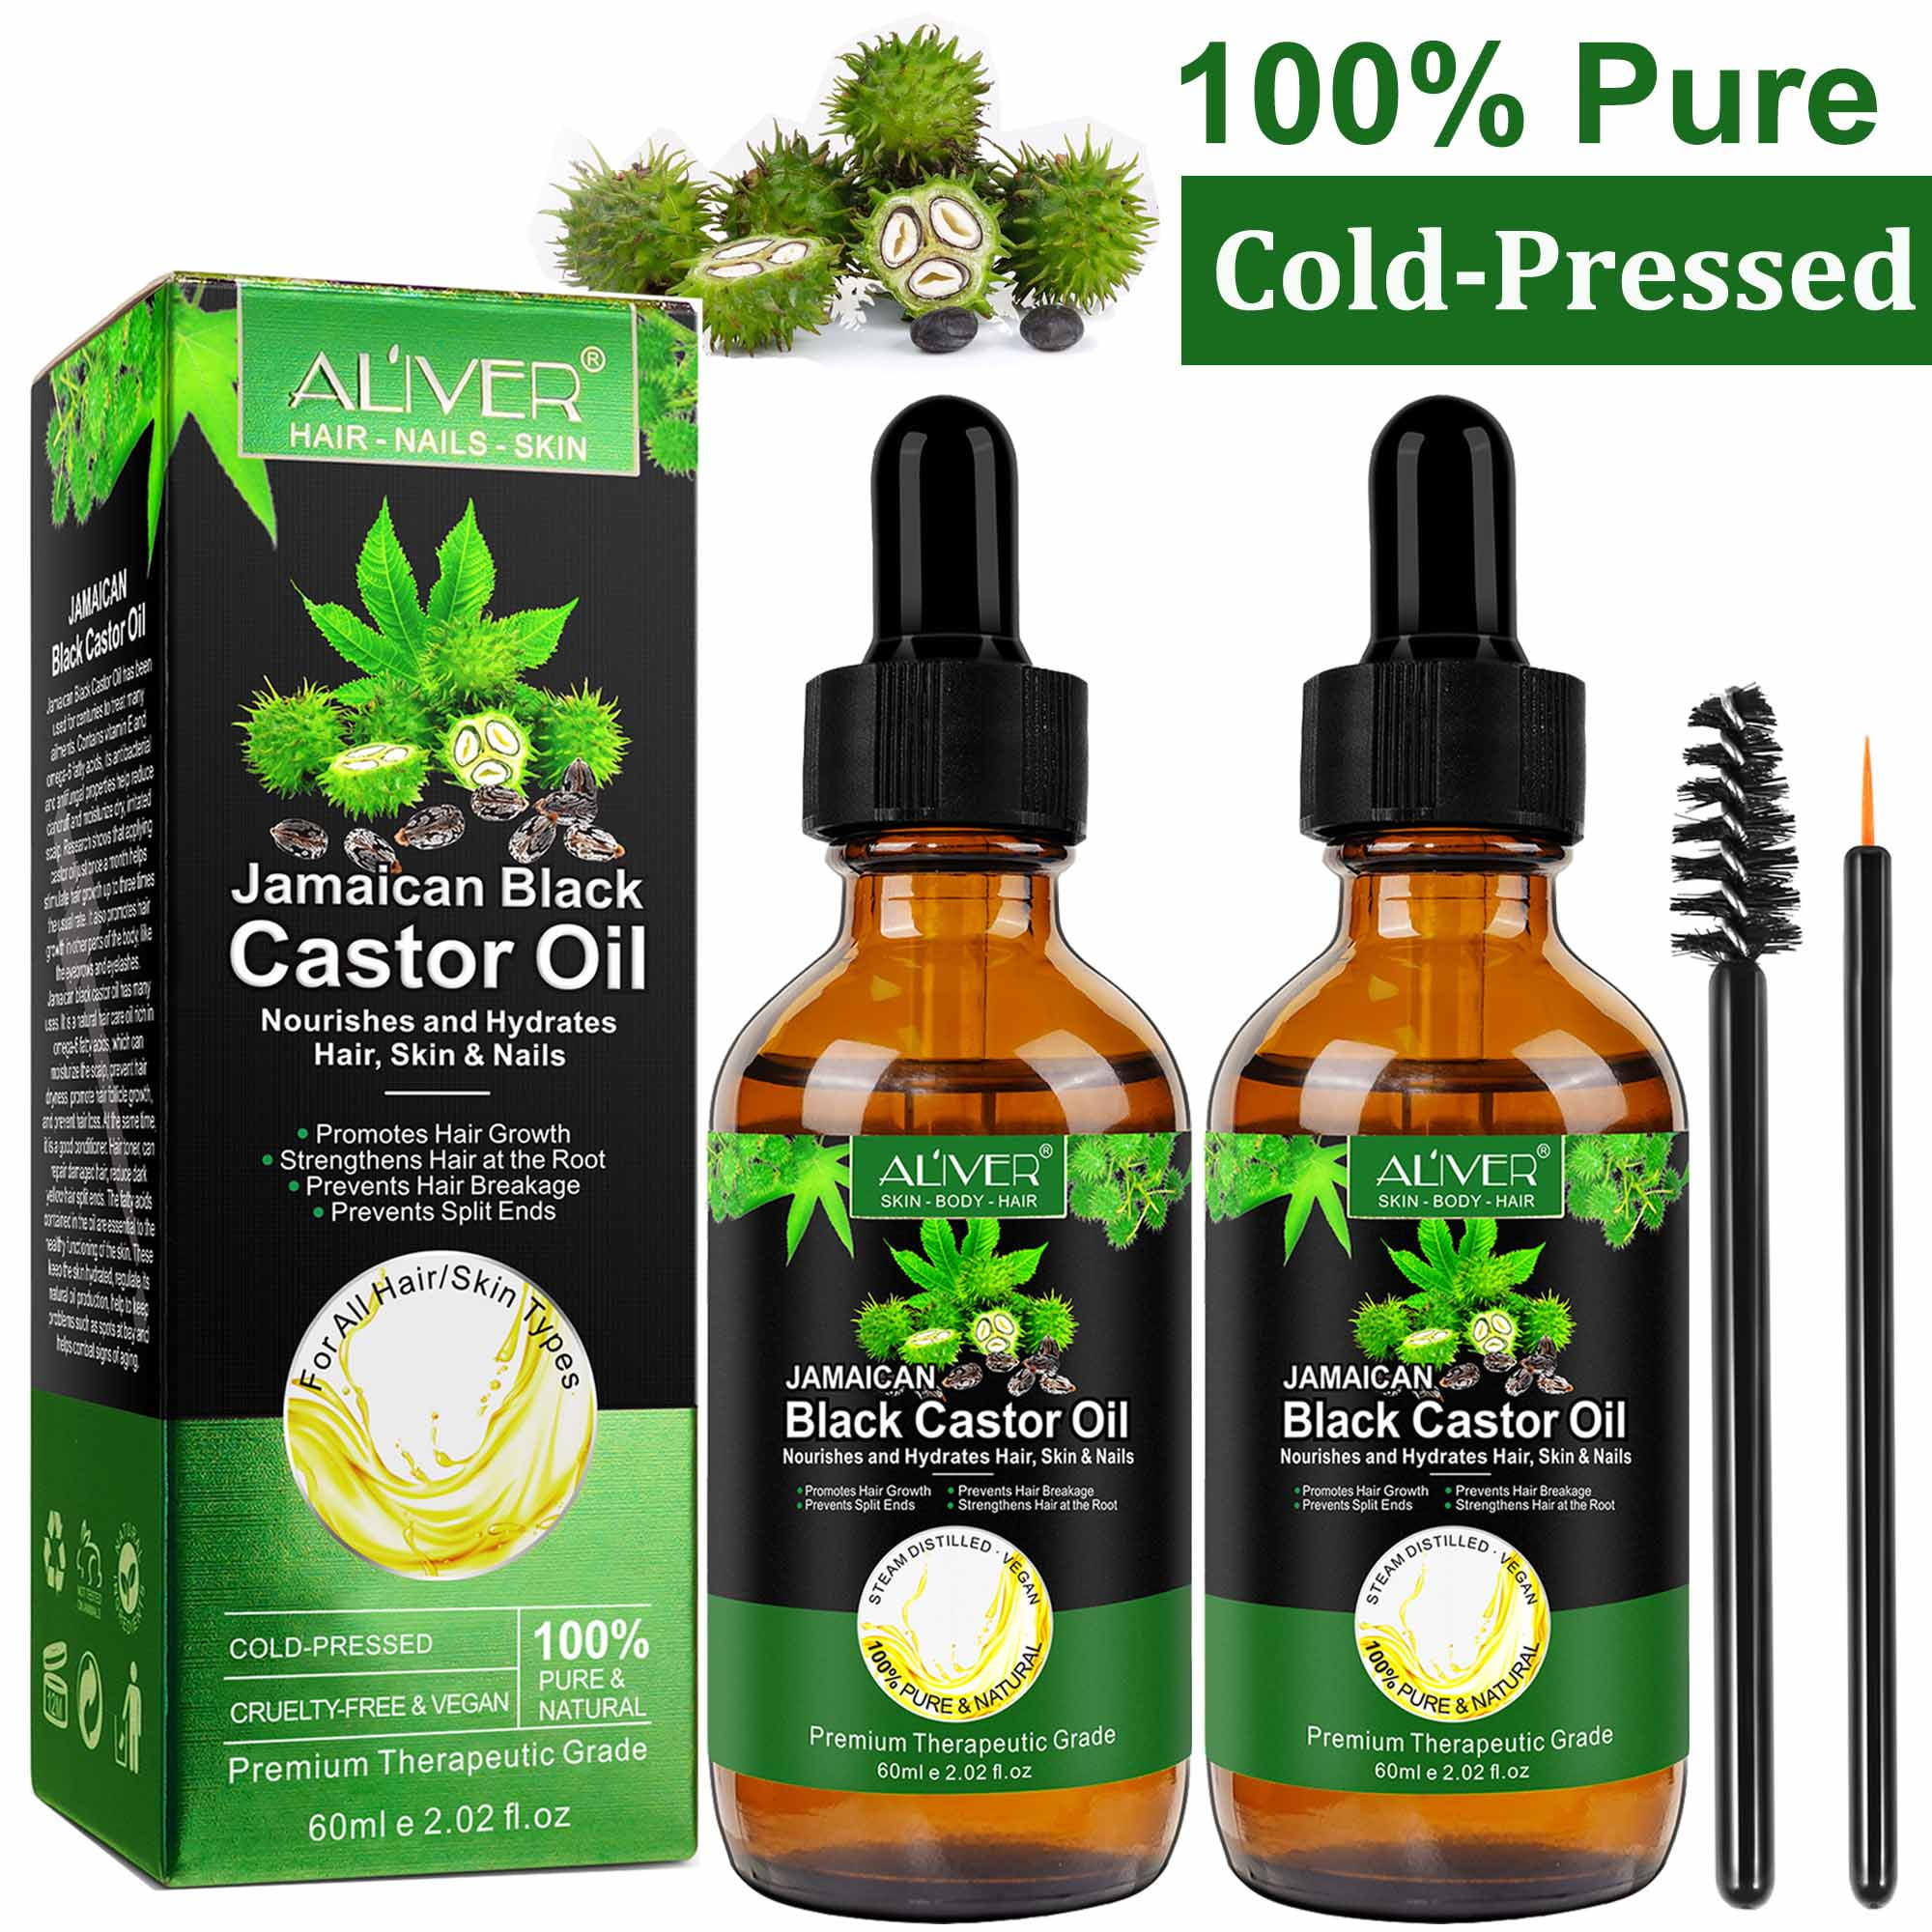 10 benefits of black castor oil for hair, skin and nails - YouTube